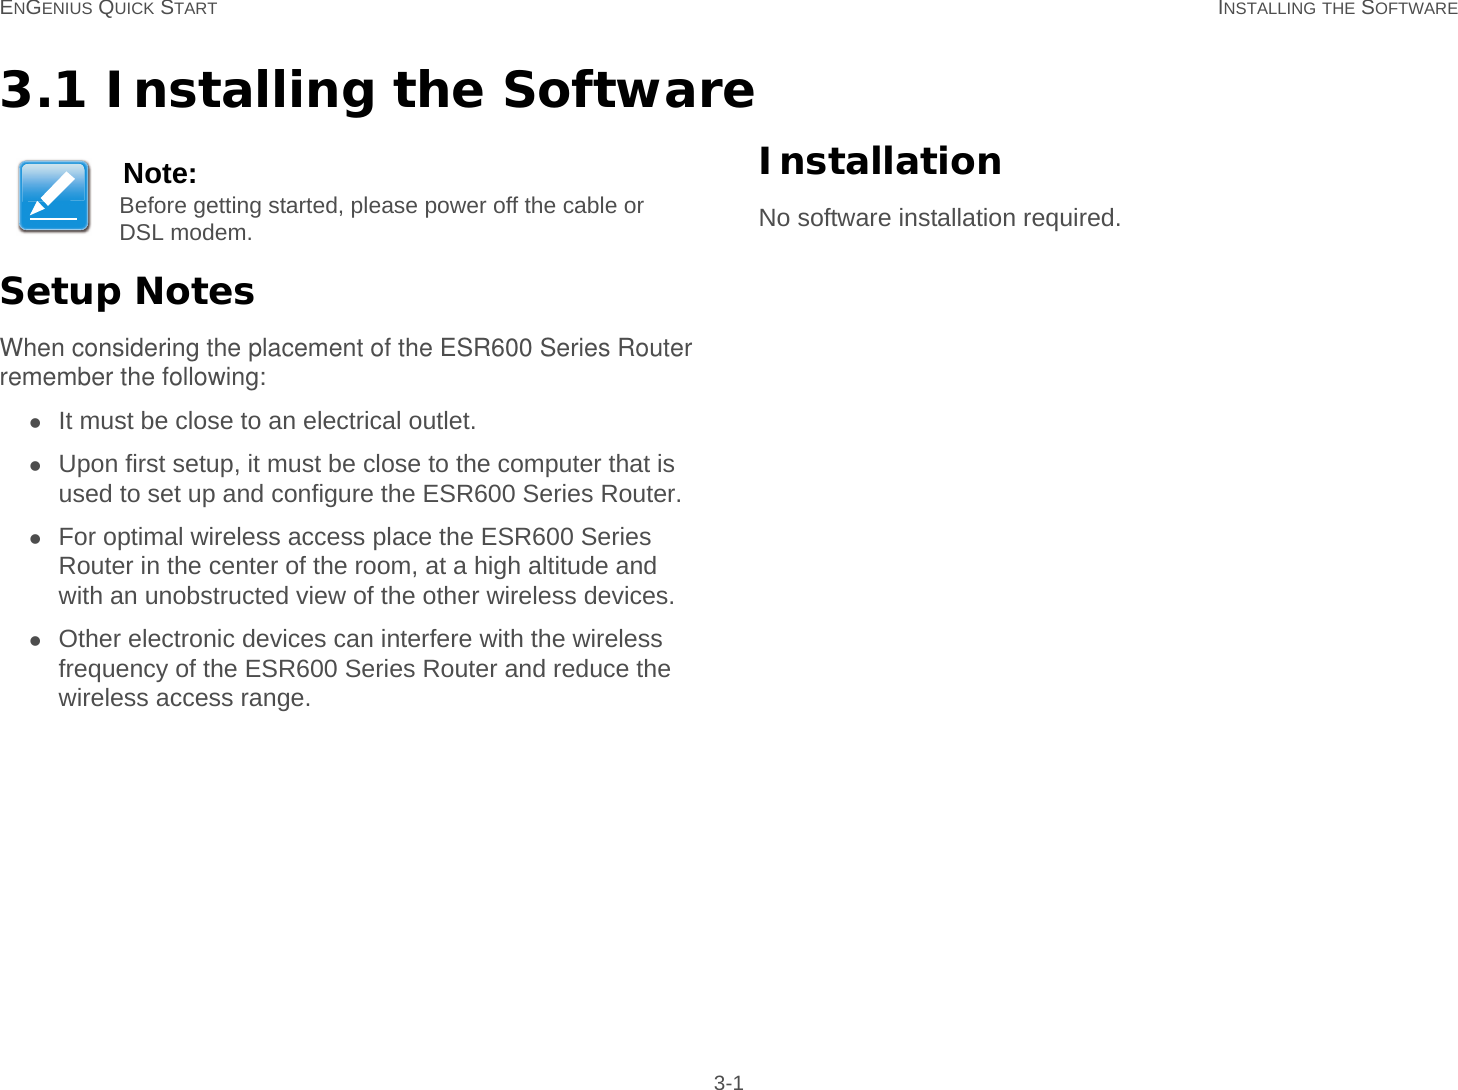 ENGENIUS QUICK START INSTALLING THE SOFTWARE 3-13.1 Installing the SoftwareSetup NotesWhen considering the placement of the ESR600 Series Router remember the following:It must be close to an electrical outlet.Upon first setup, it must be close to the computer that is used to set up and configure the ESR600 Series Router.For optimal wireless access place the ESR600 Series Router in the center of the room, at a high altitude and with an unobstructed view of the other wireless devices.Other electronic devices can interfere with the wireless frequency of the ESR600 Series Router and reduce the wireless access range.InstallationNo software installation required.Note:Before getting started, please power off the cable or DSL modem.